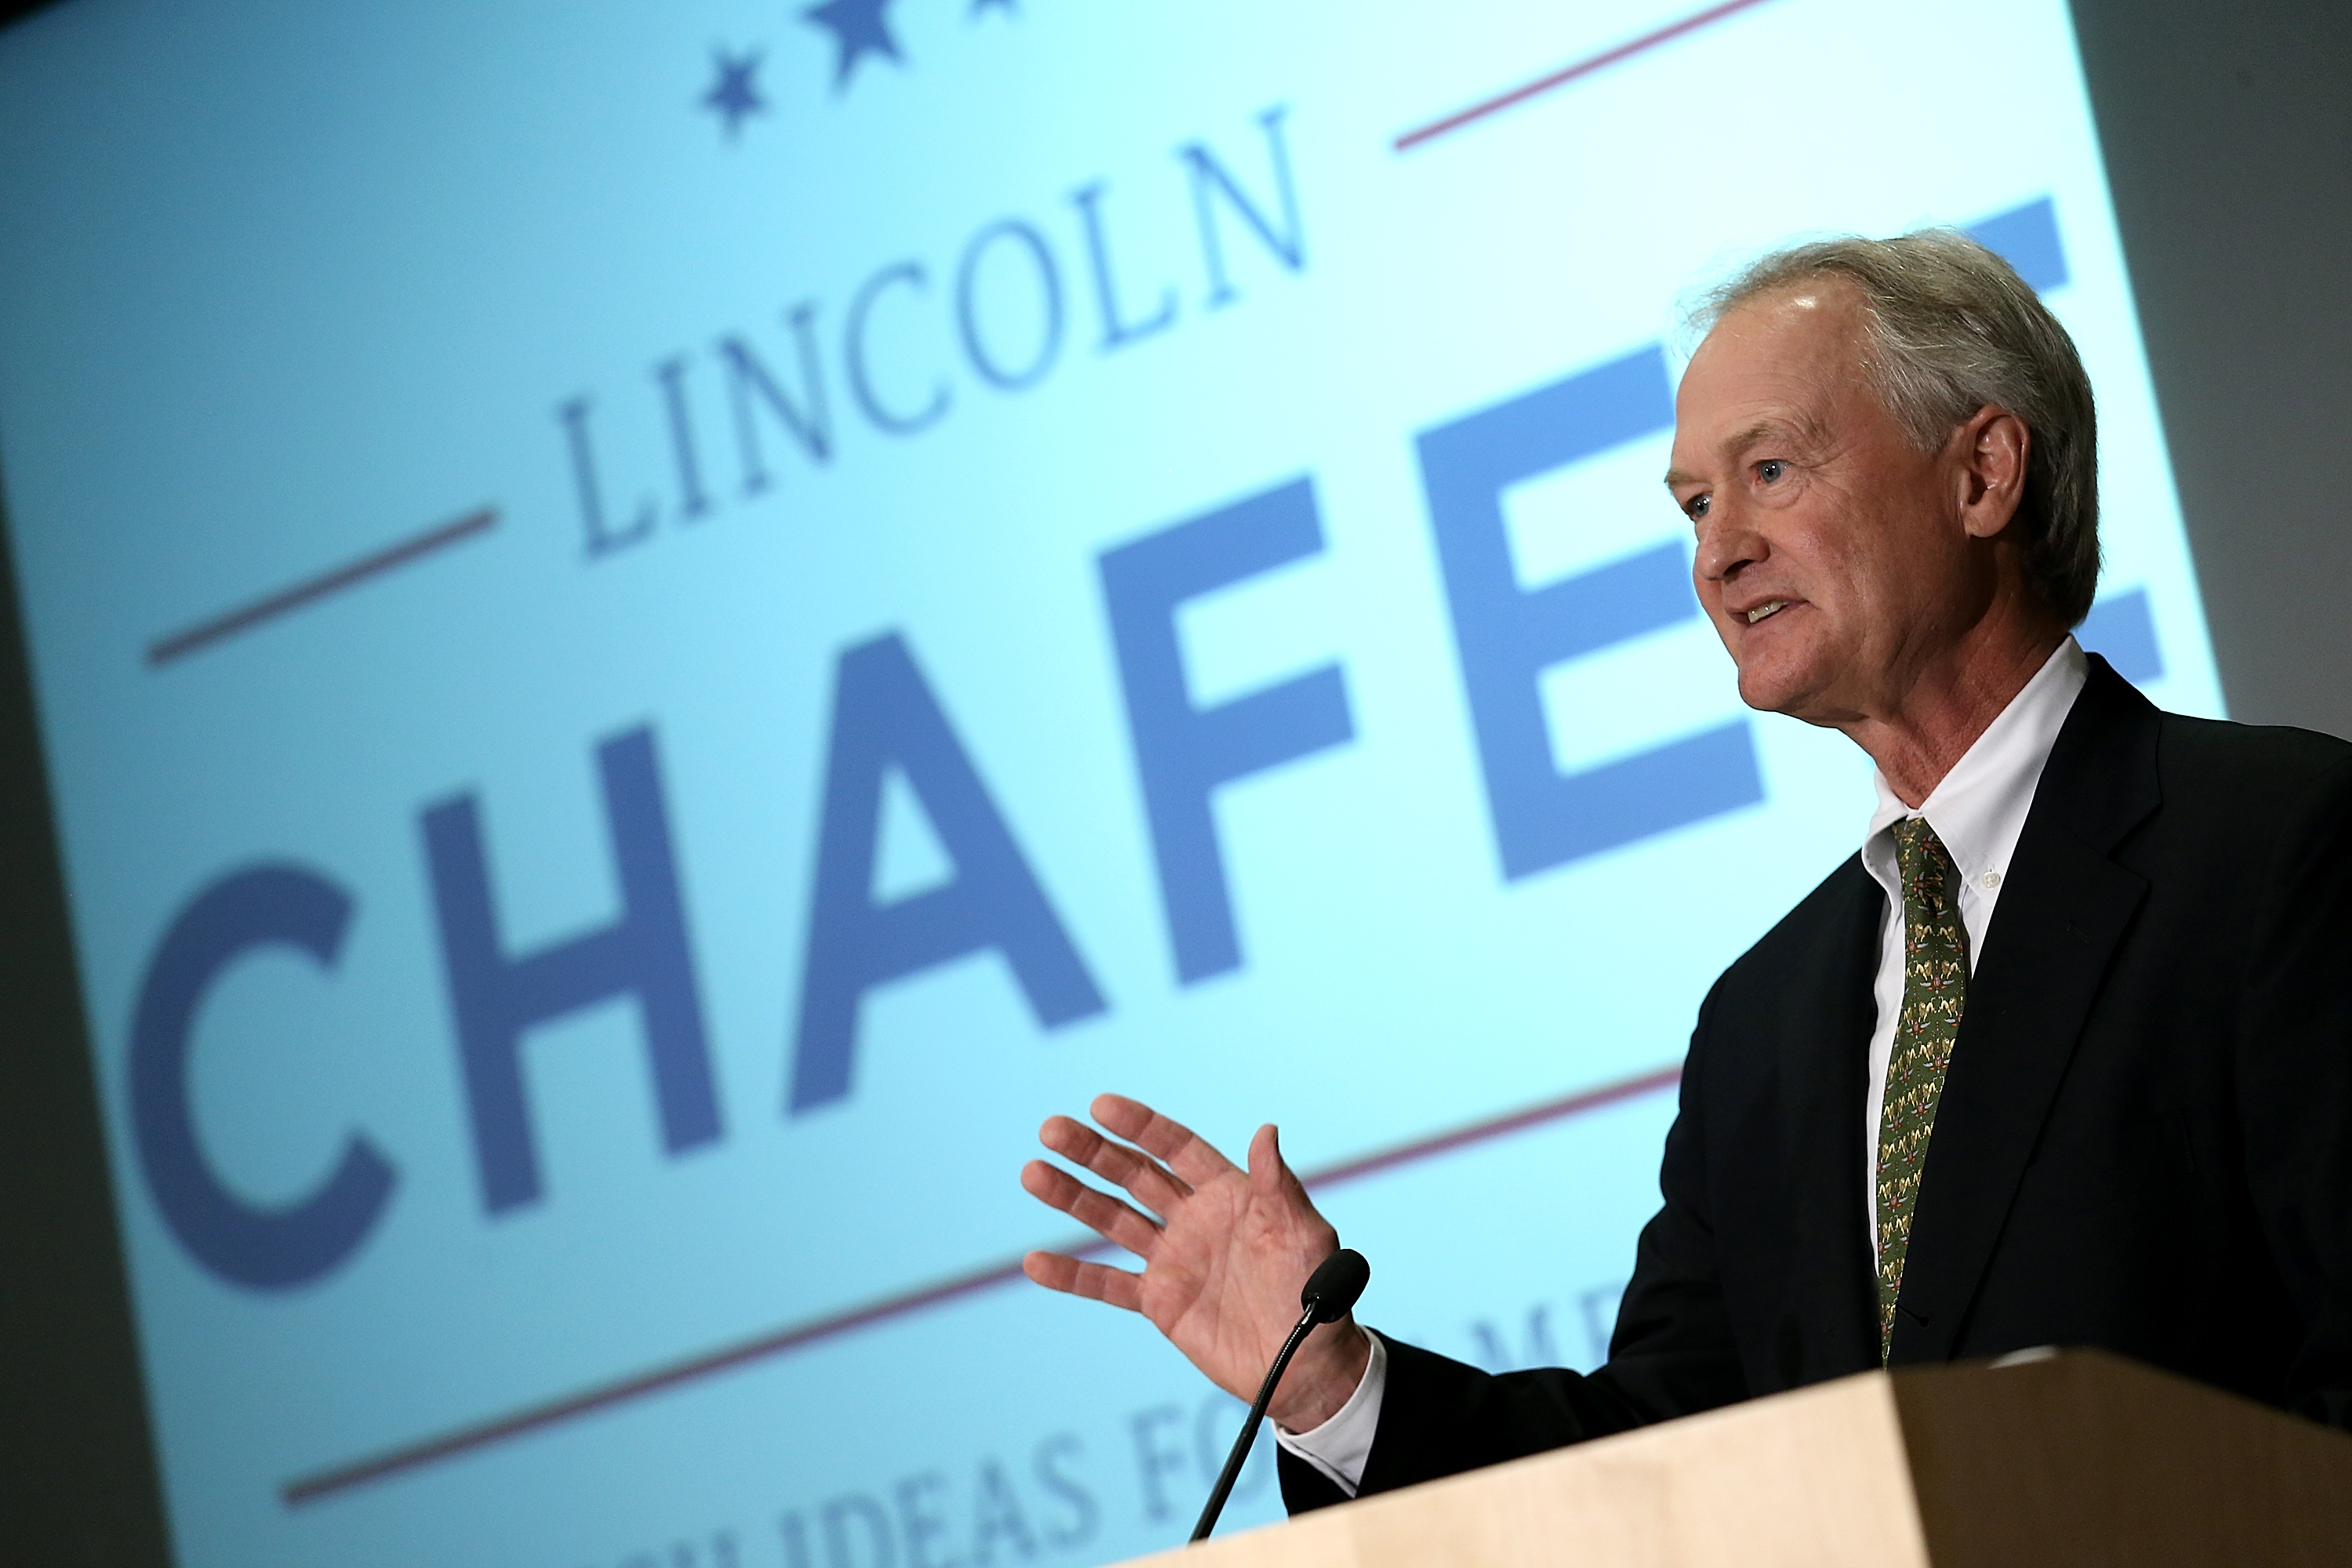 Democratic presidential candidate and former Sen. Lincoln Chafee (D-RI) announces his candidacy for the U.S. presidency at George Mason University June 3, 2015 in Arlington, Virginia. Chafee joins Hillary Clinton, Bernie Sanders and Martin O'Malley in seeking the Democratic nomination. (Win McNamee&mdash;Getty Images)